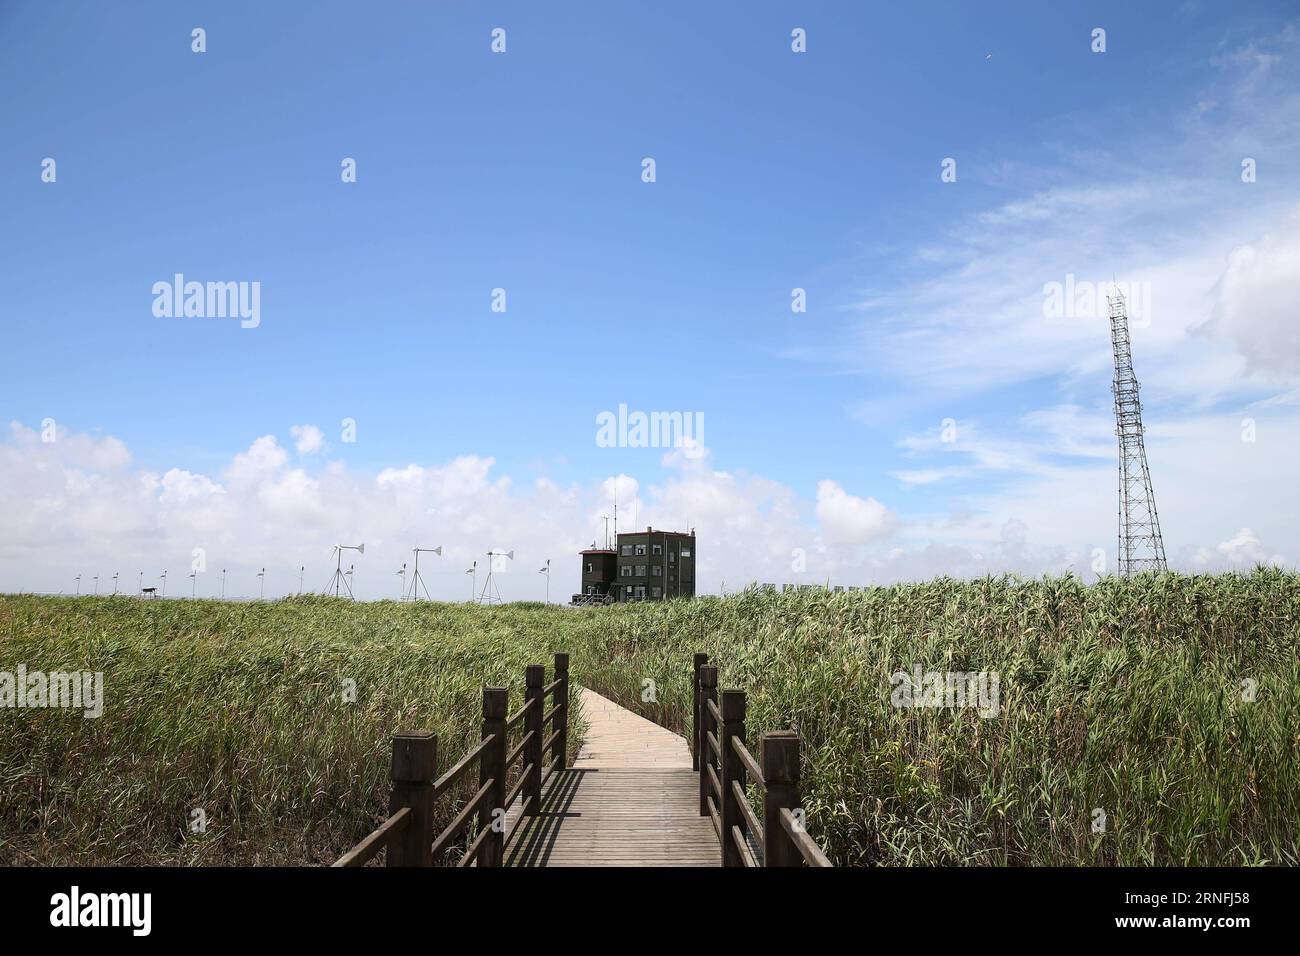 (160811) -- SHANGHAI, Aug. 11, 2016 -- Photo taken on Aug. 10, 2016 shows the house of administration bureau in Jiuduansha Wetland in Shanghai, east China. Jiuduansha Wetland Nature Reserve was established in March 6, 2000. Accodring to a report published in 2015, the wetland has become the habitat of 403 species of insects, 135 speices of fishes and 206 species of birds including three first class national protected animals, namely, oriental white stork, hooded crane and relict gull. ) (zkr) CHINA-SHANGHAI-JIUDUANSHA WETLAND(CN) DingxTing PUBLICATIONxNOTxINxCHN   160811 Shanghai Aug 11 2016 P Stock Photo